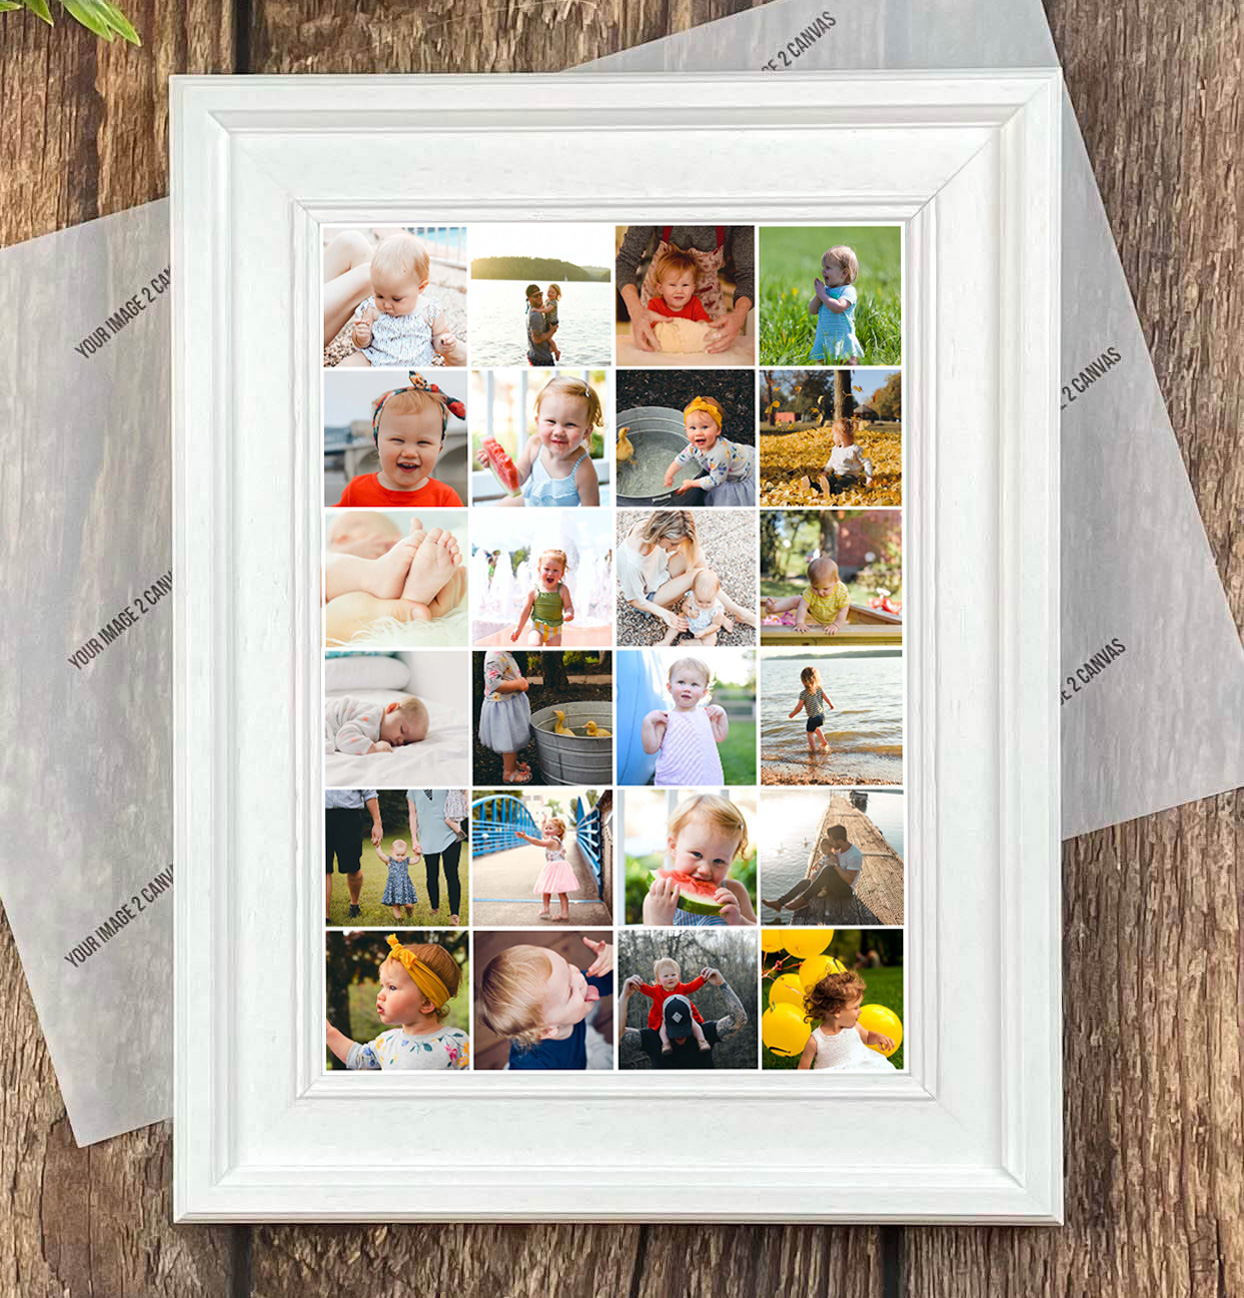 Personalised collage photo print including 24 of your own photos can be displayed portrait or landscape displayed in a quality white photo frame